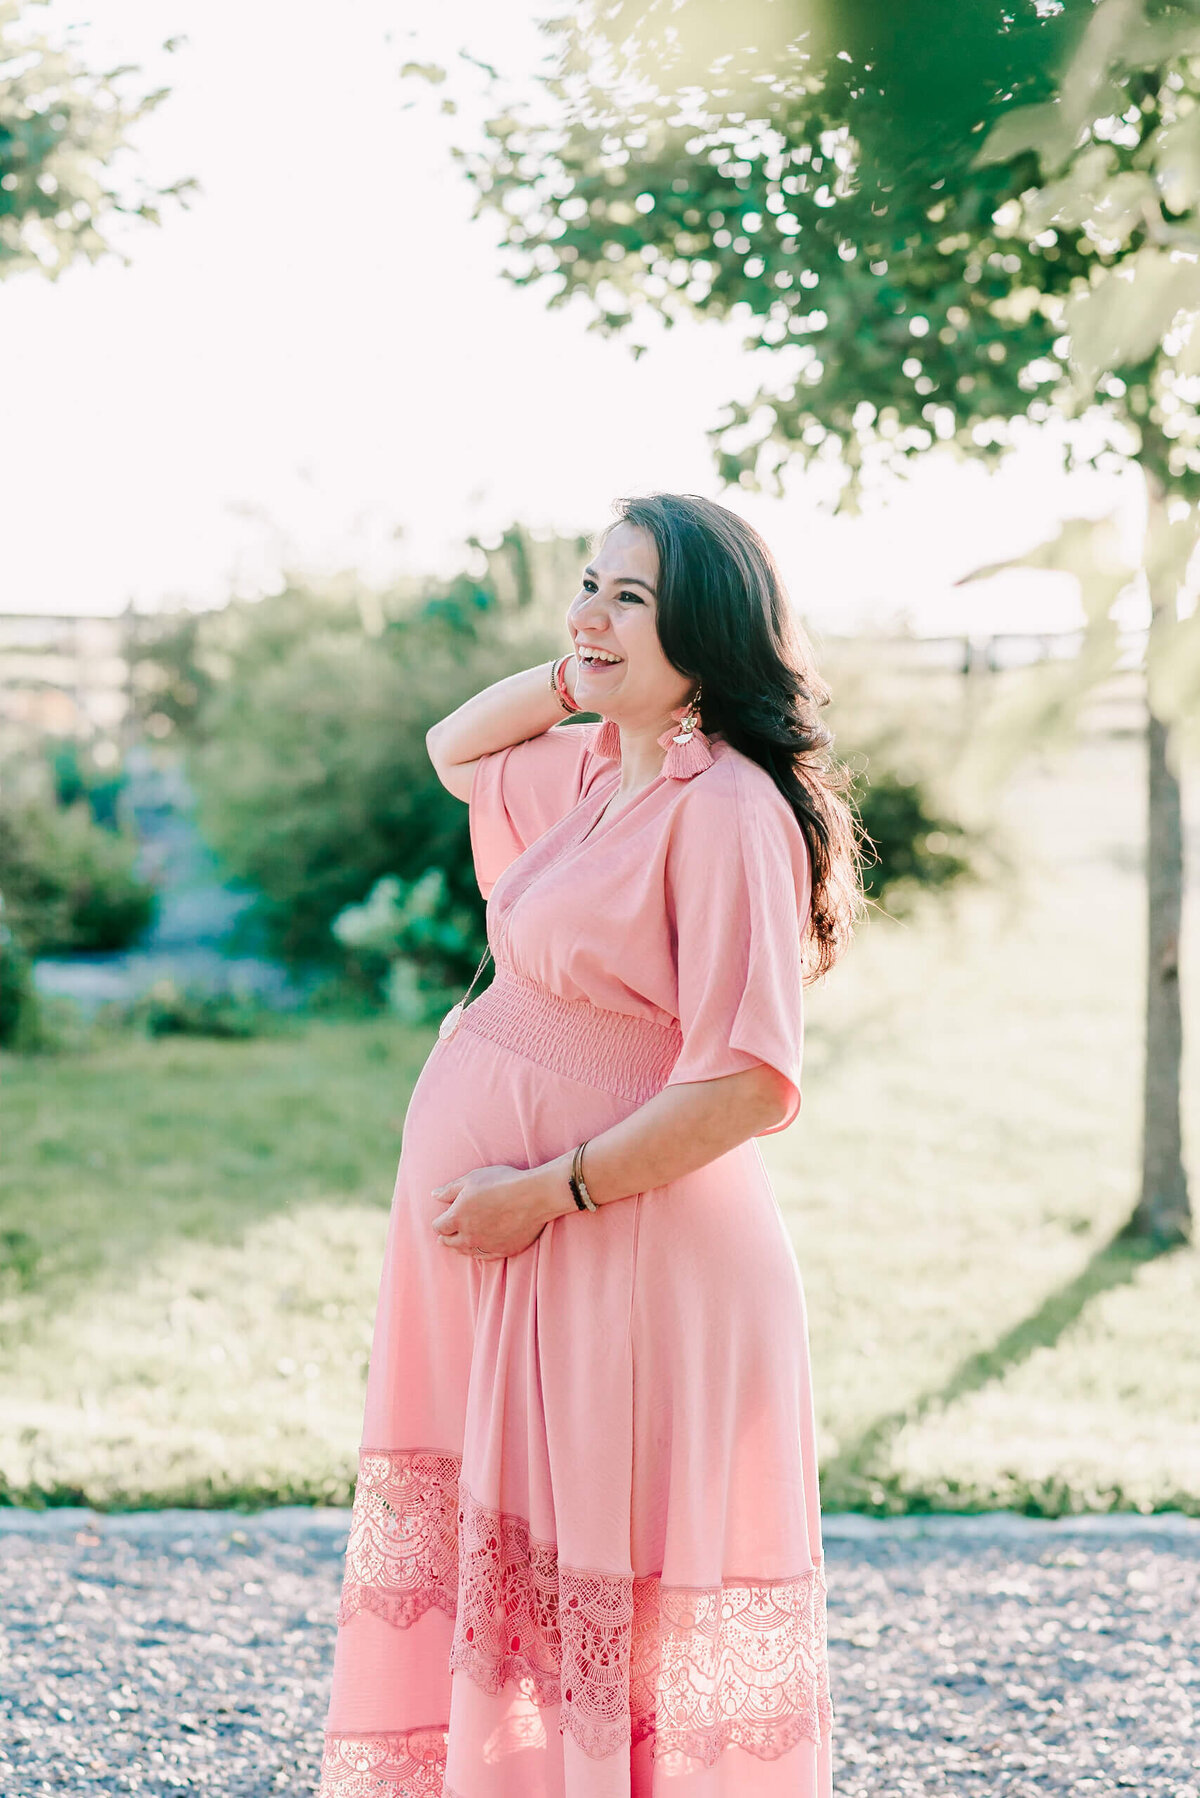 An expecting mother laughing joyfully at her northern virginia maternity session